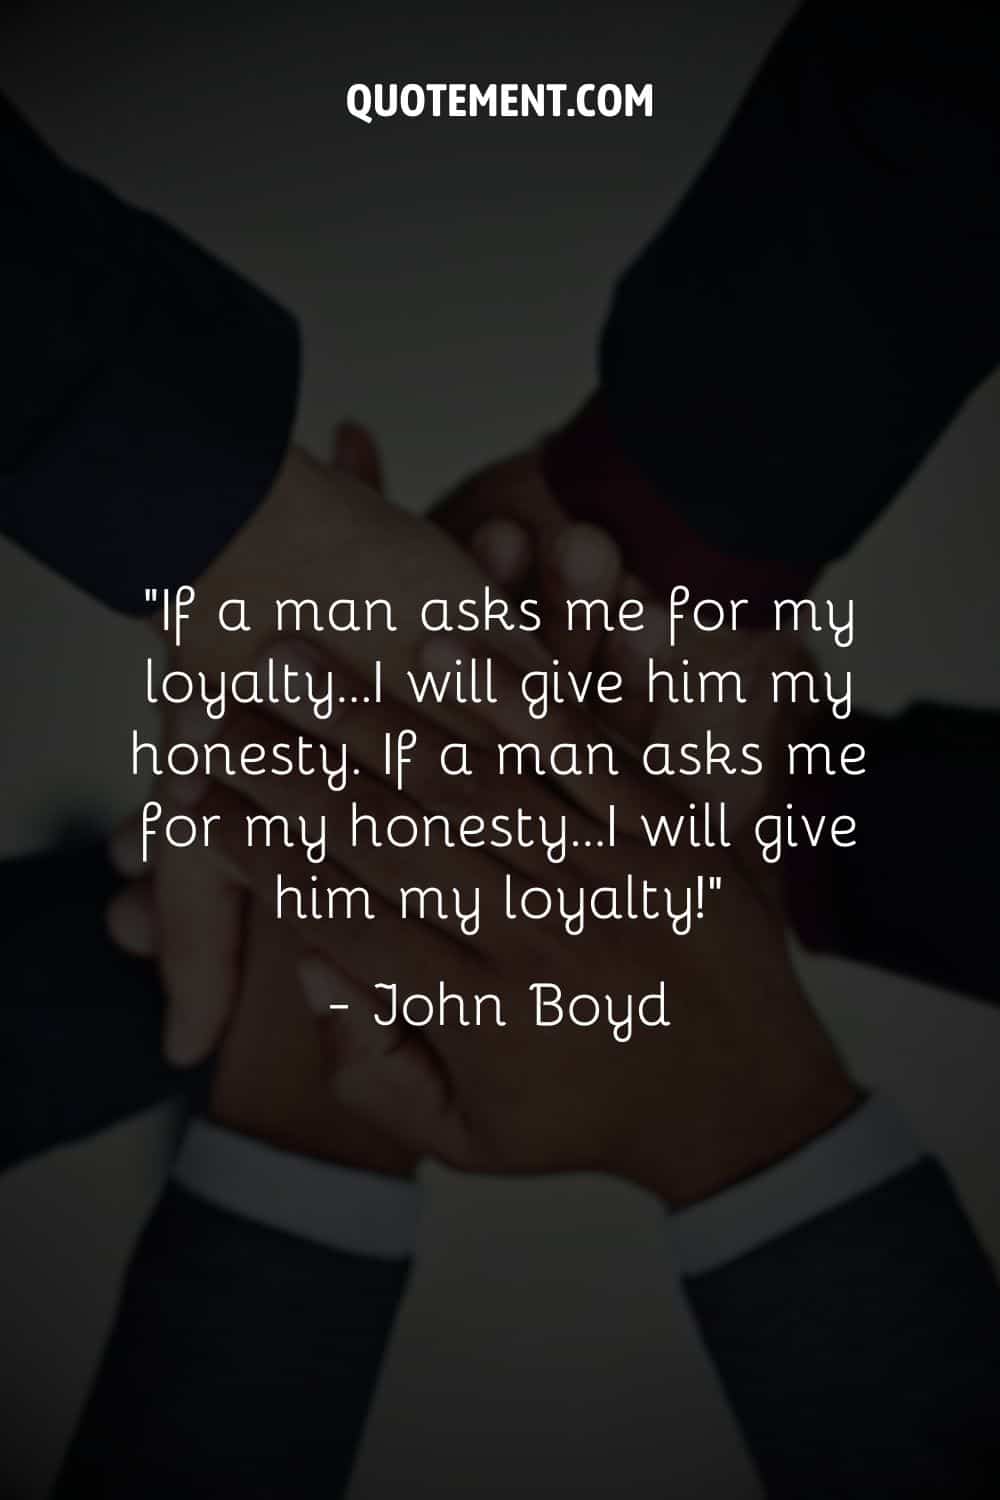 “If a man asks me for my loyalty...I will give him my honesty. If a man asks me for my honesty...I will give him my loyalty!” ― John Boyd